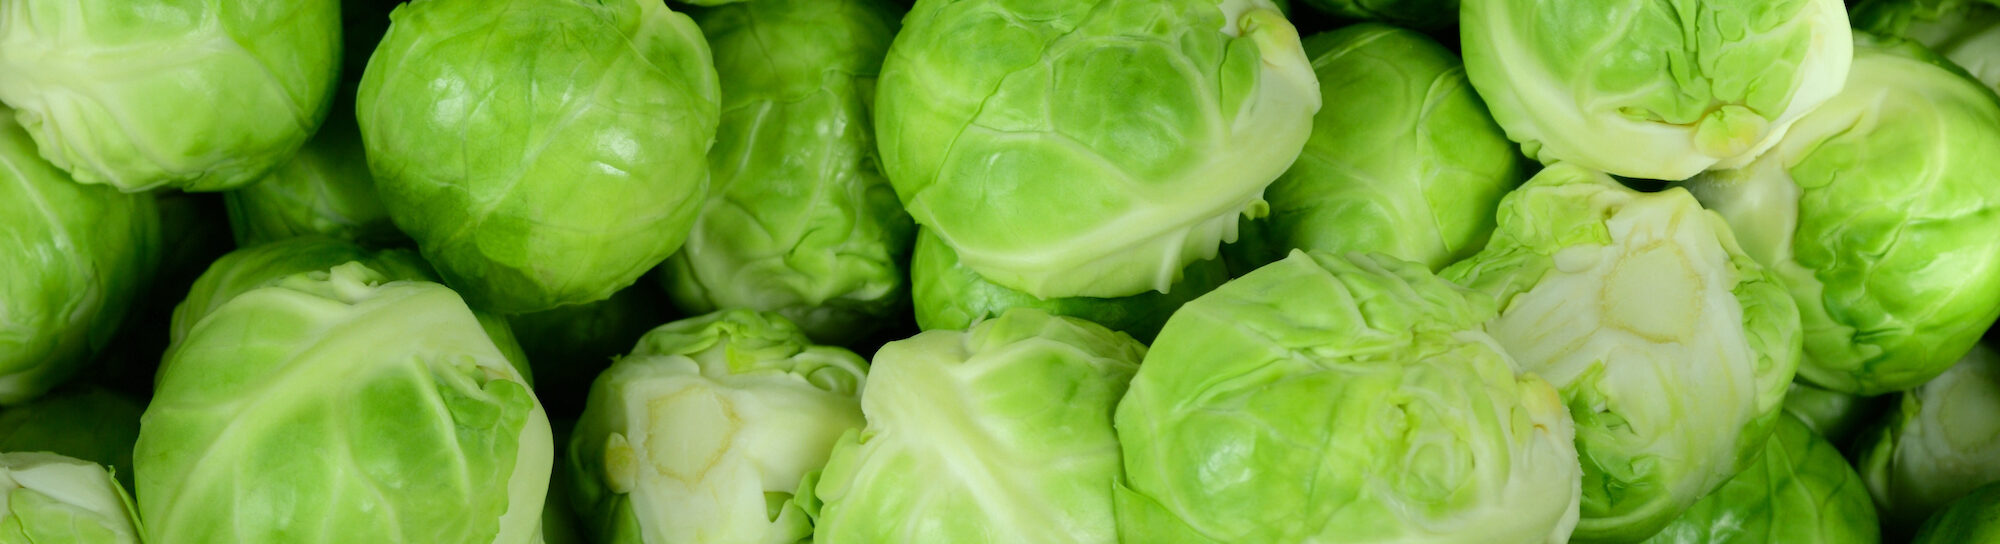 Lack of plant protection resulting in declining cultivation of Brussels sprouts